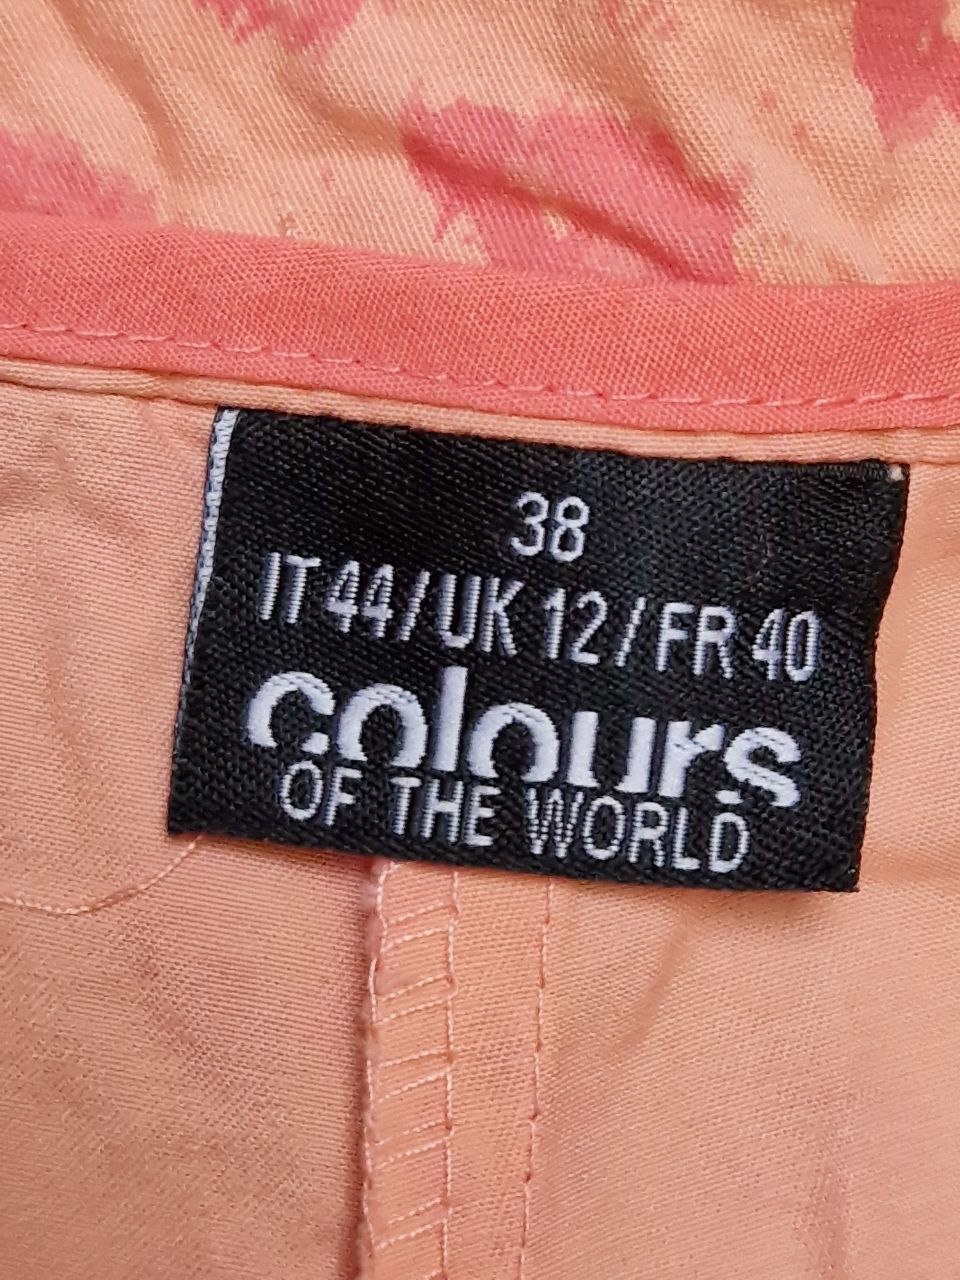 Colours of the world.  Bequeme Shorts.  Größe 38. 